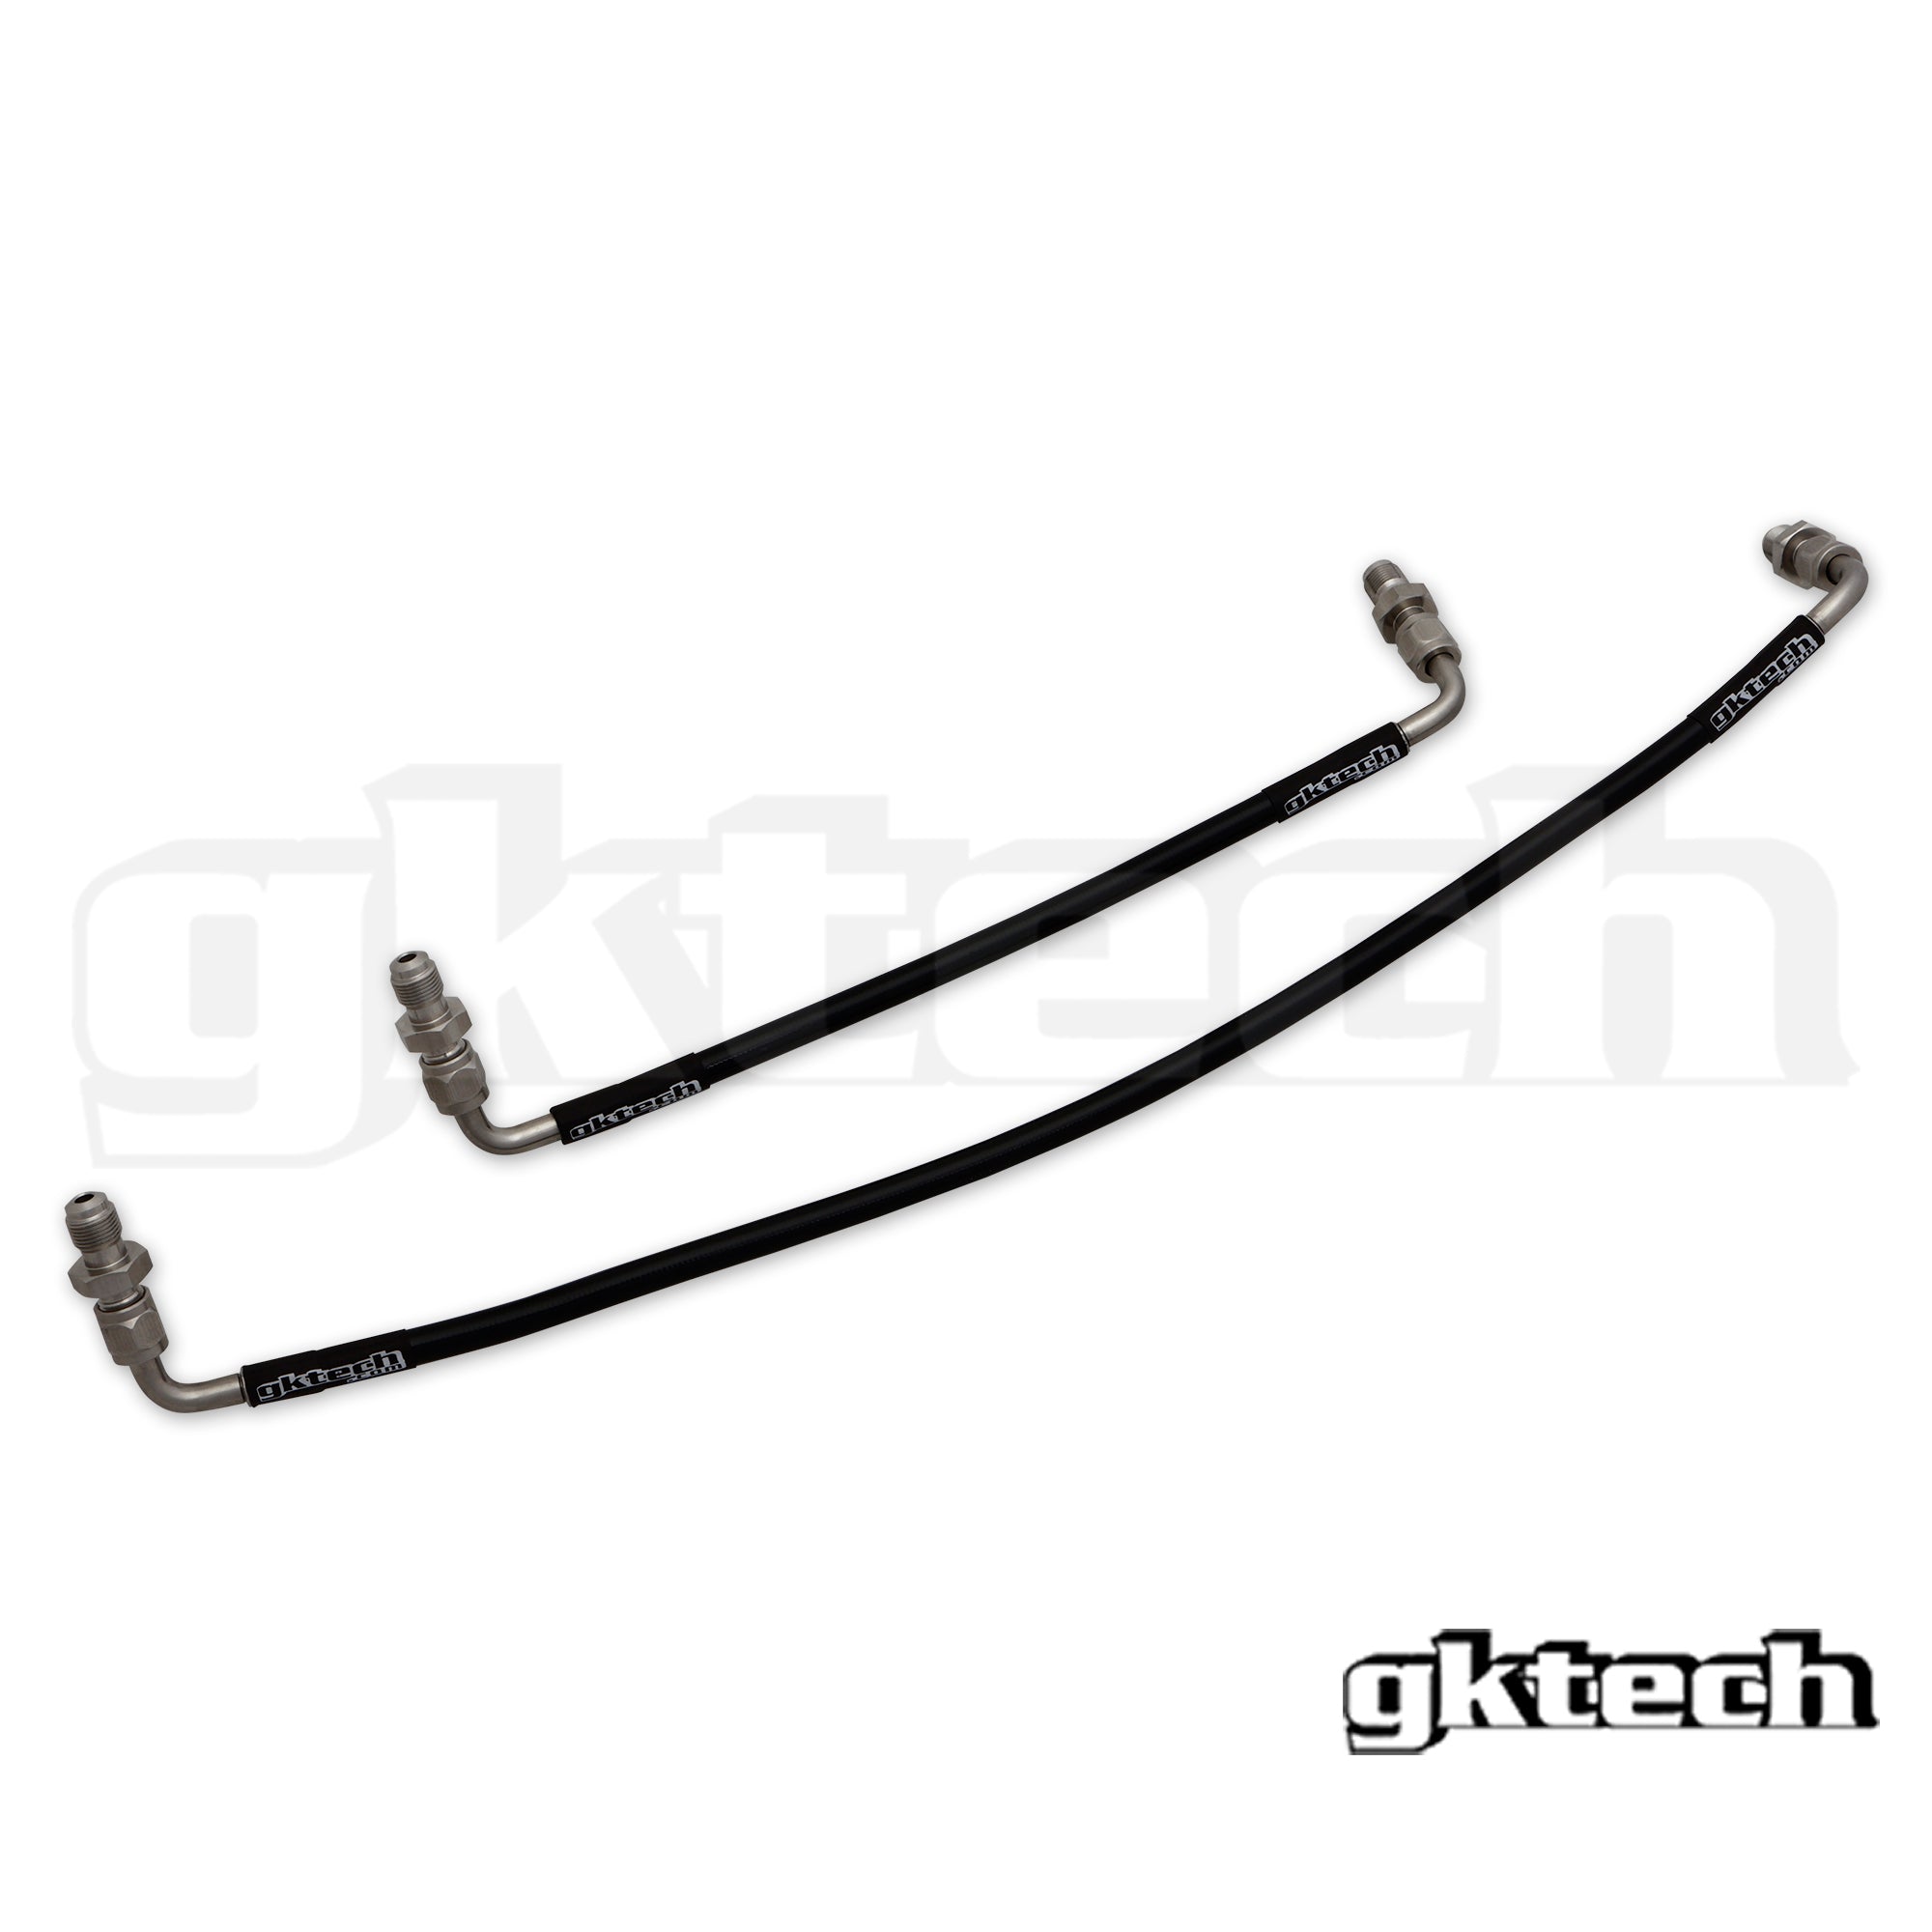 Z33 350z Power steering hard line replacements (pair)